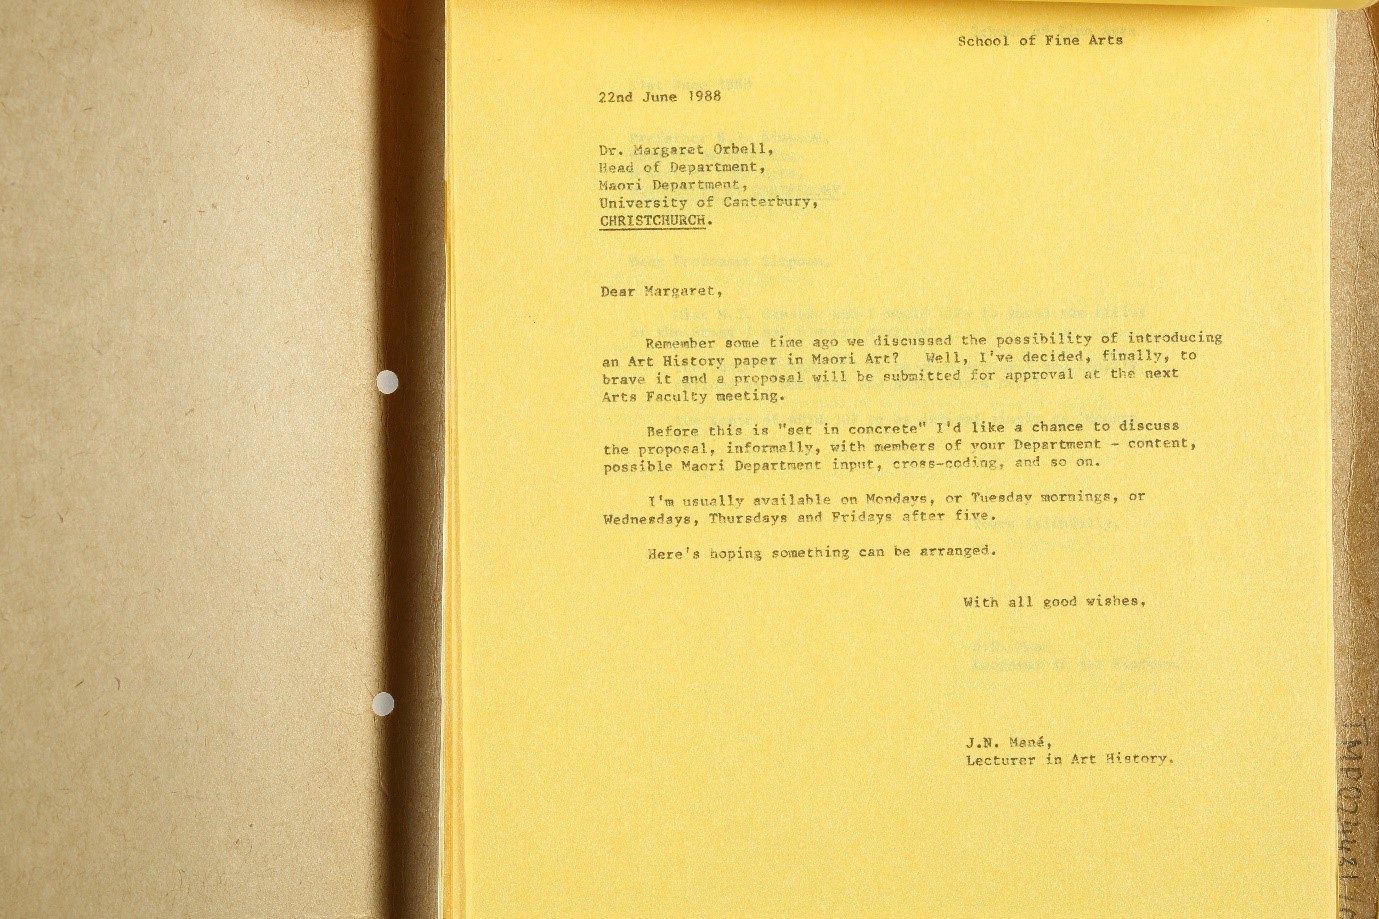 Letter written with a typewriter on yellow paper